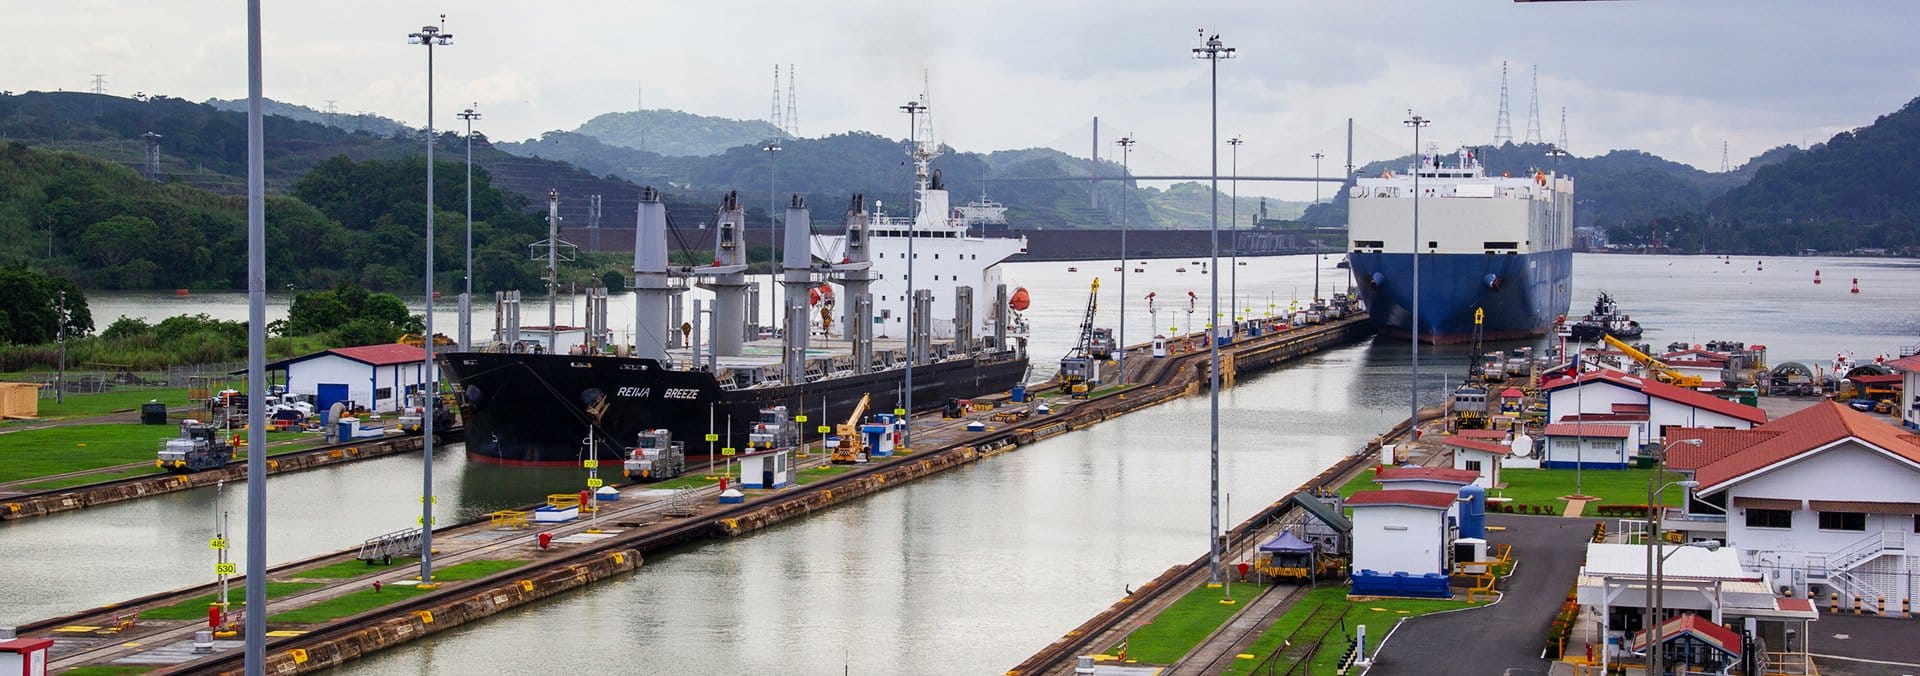 Panama Canal in Private